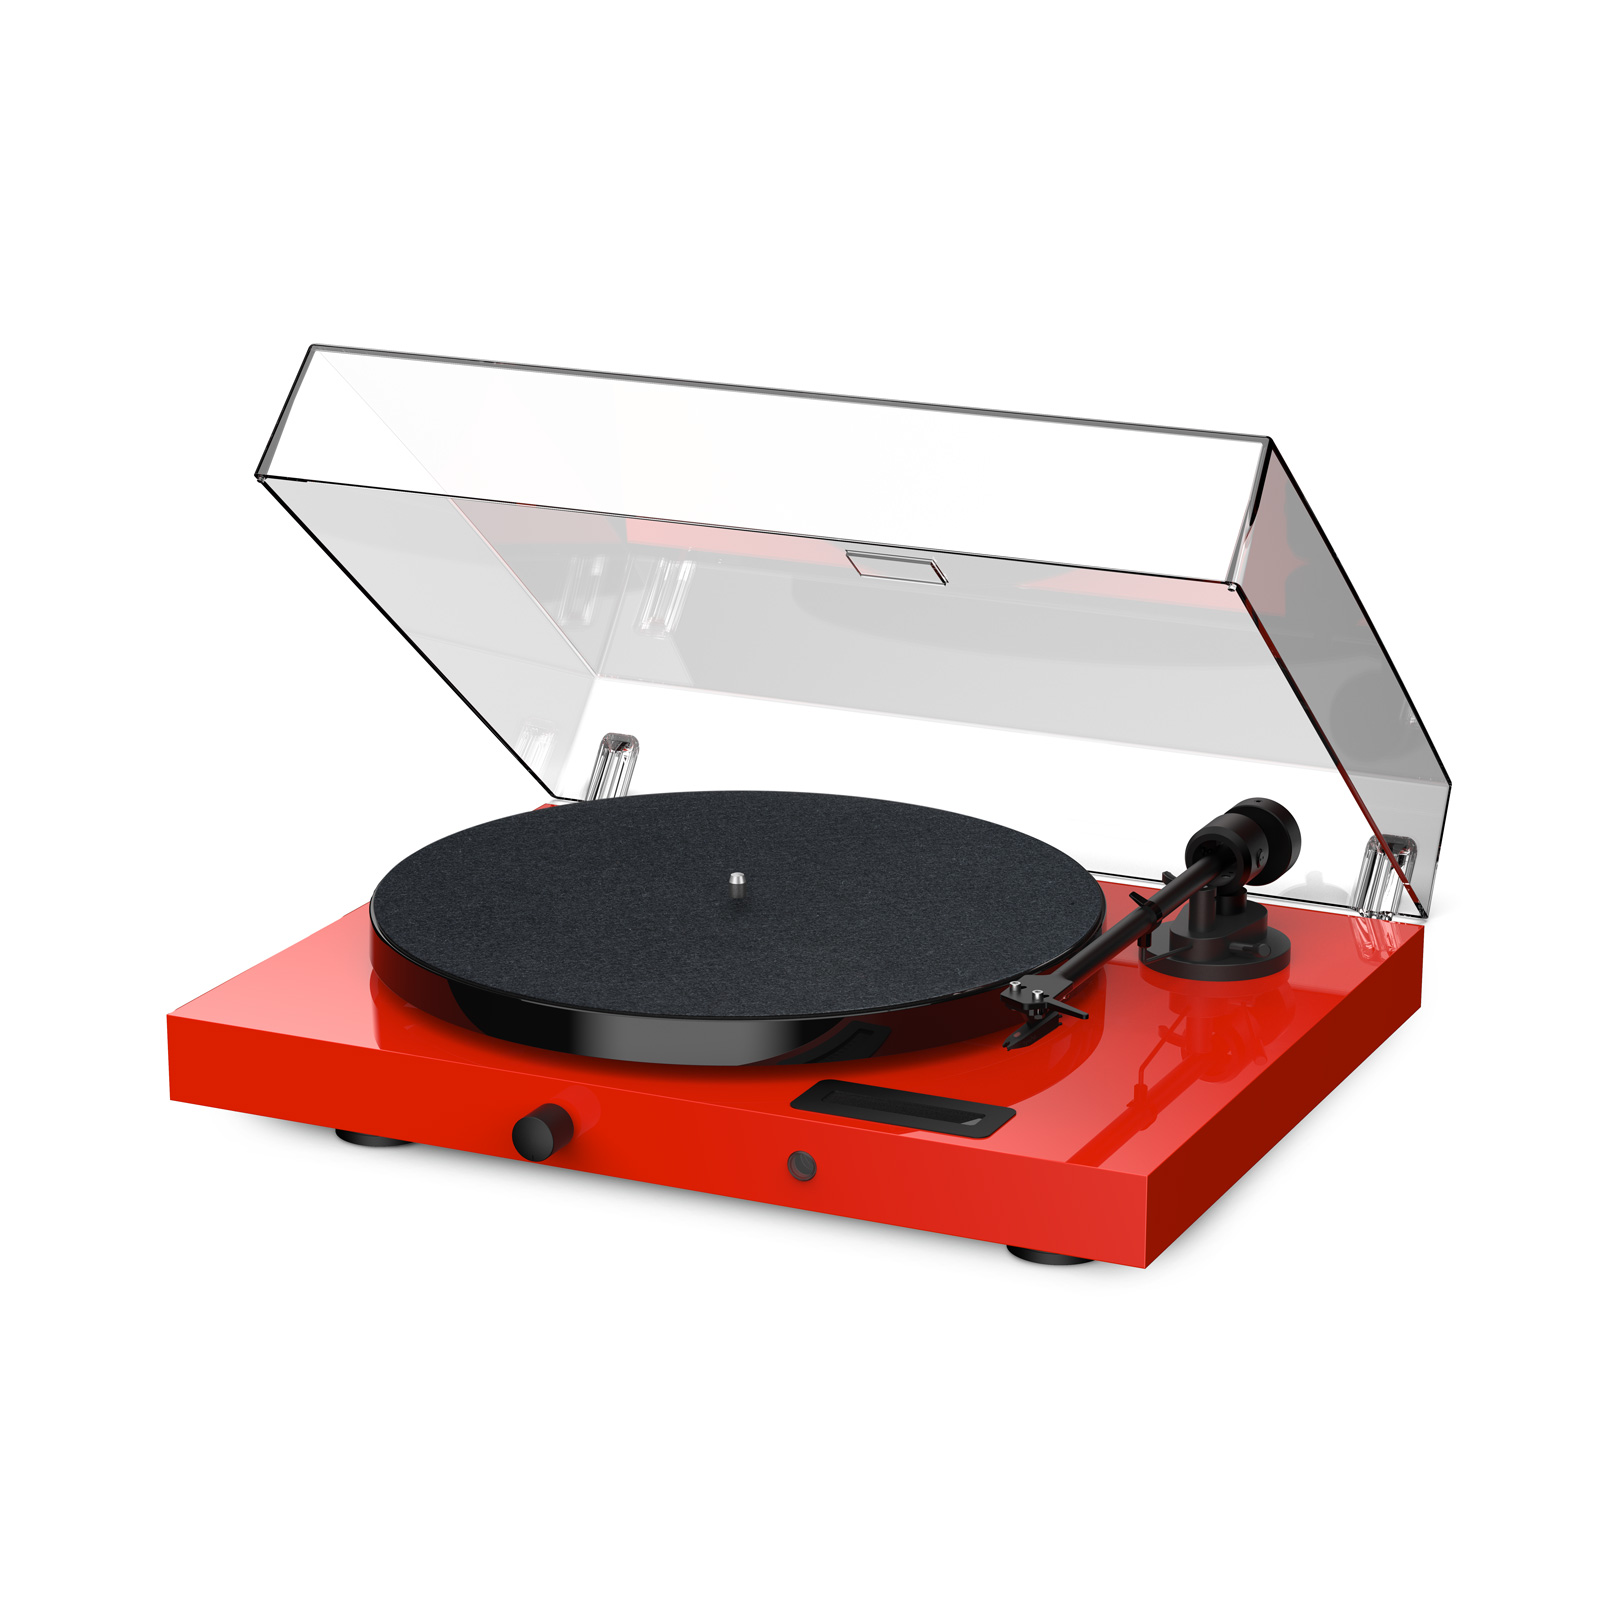 Pro-Ject E1 review: an entry-level turntable with big sound